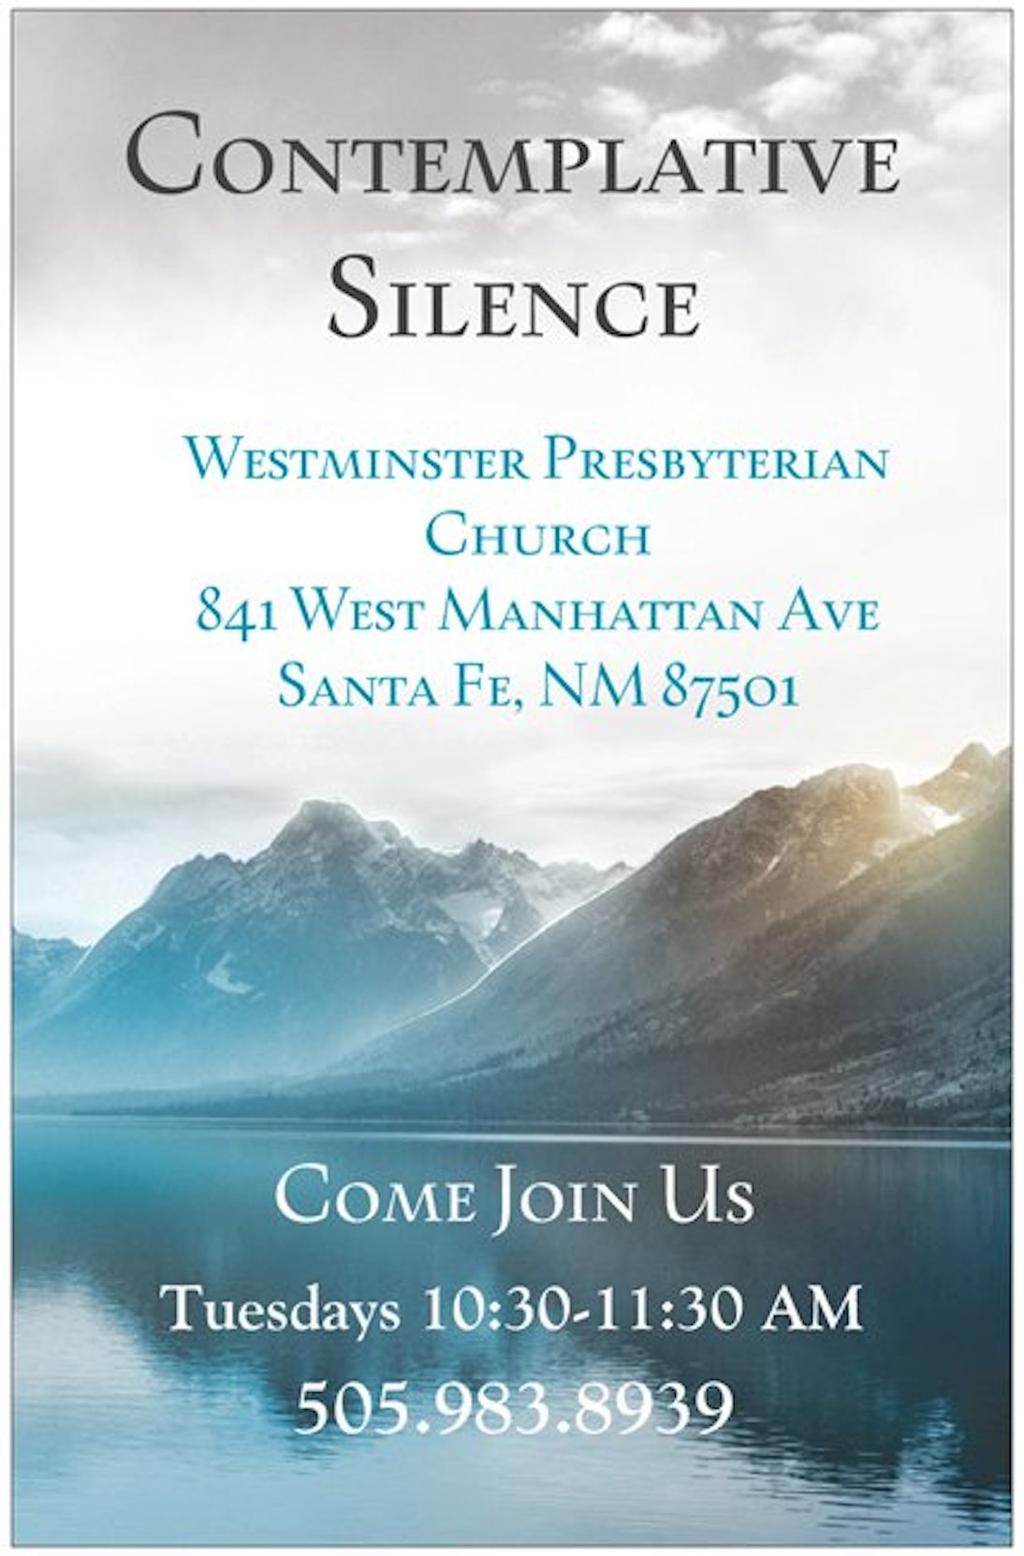 Contemplative Silence ~ Tuesday Mornings at 10:30 ~ CONTEMPLATIVE SILENCE WILL NOT MEET ON TUESDAY DECEMBER 25TH,